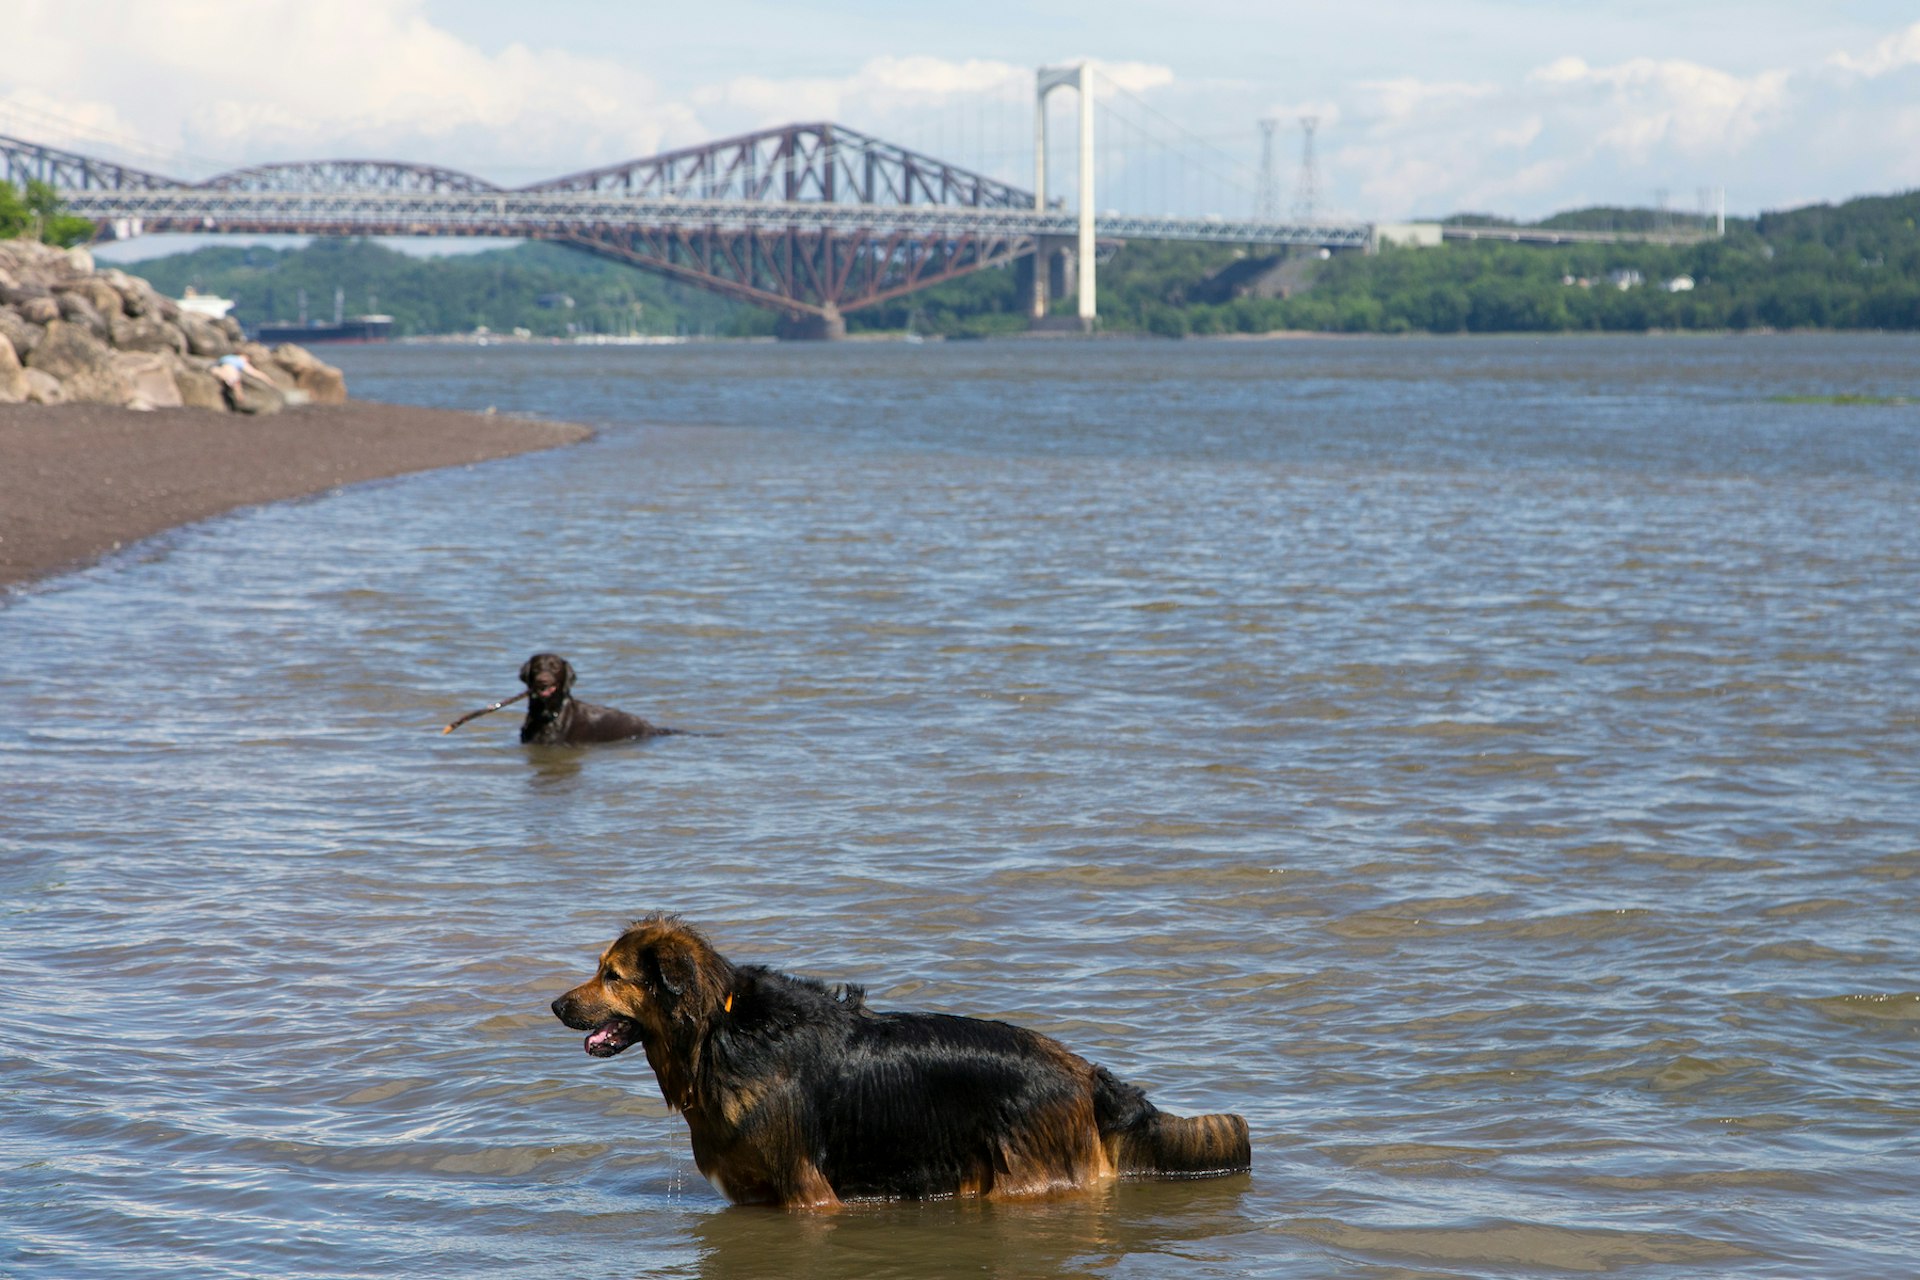 Dark long-haired dog wades in the St Lawrence River, Québec City, Québec, Canada